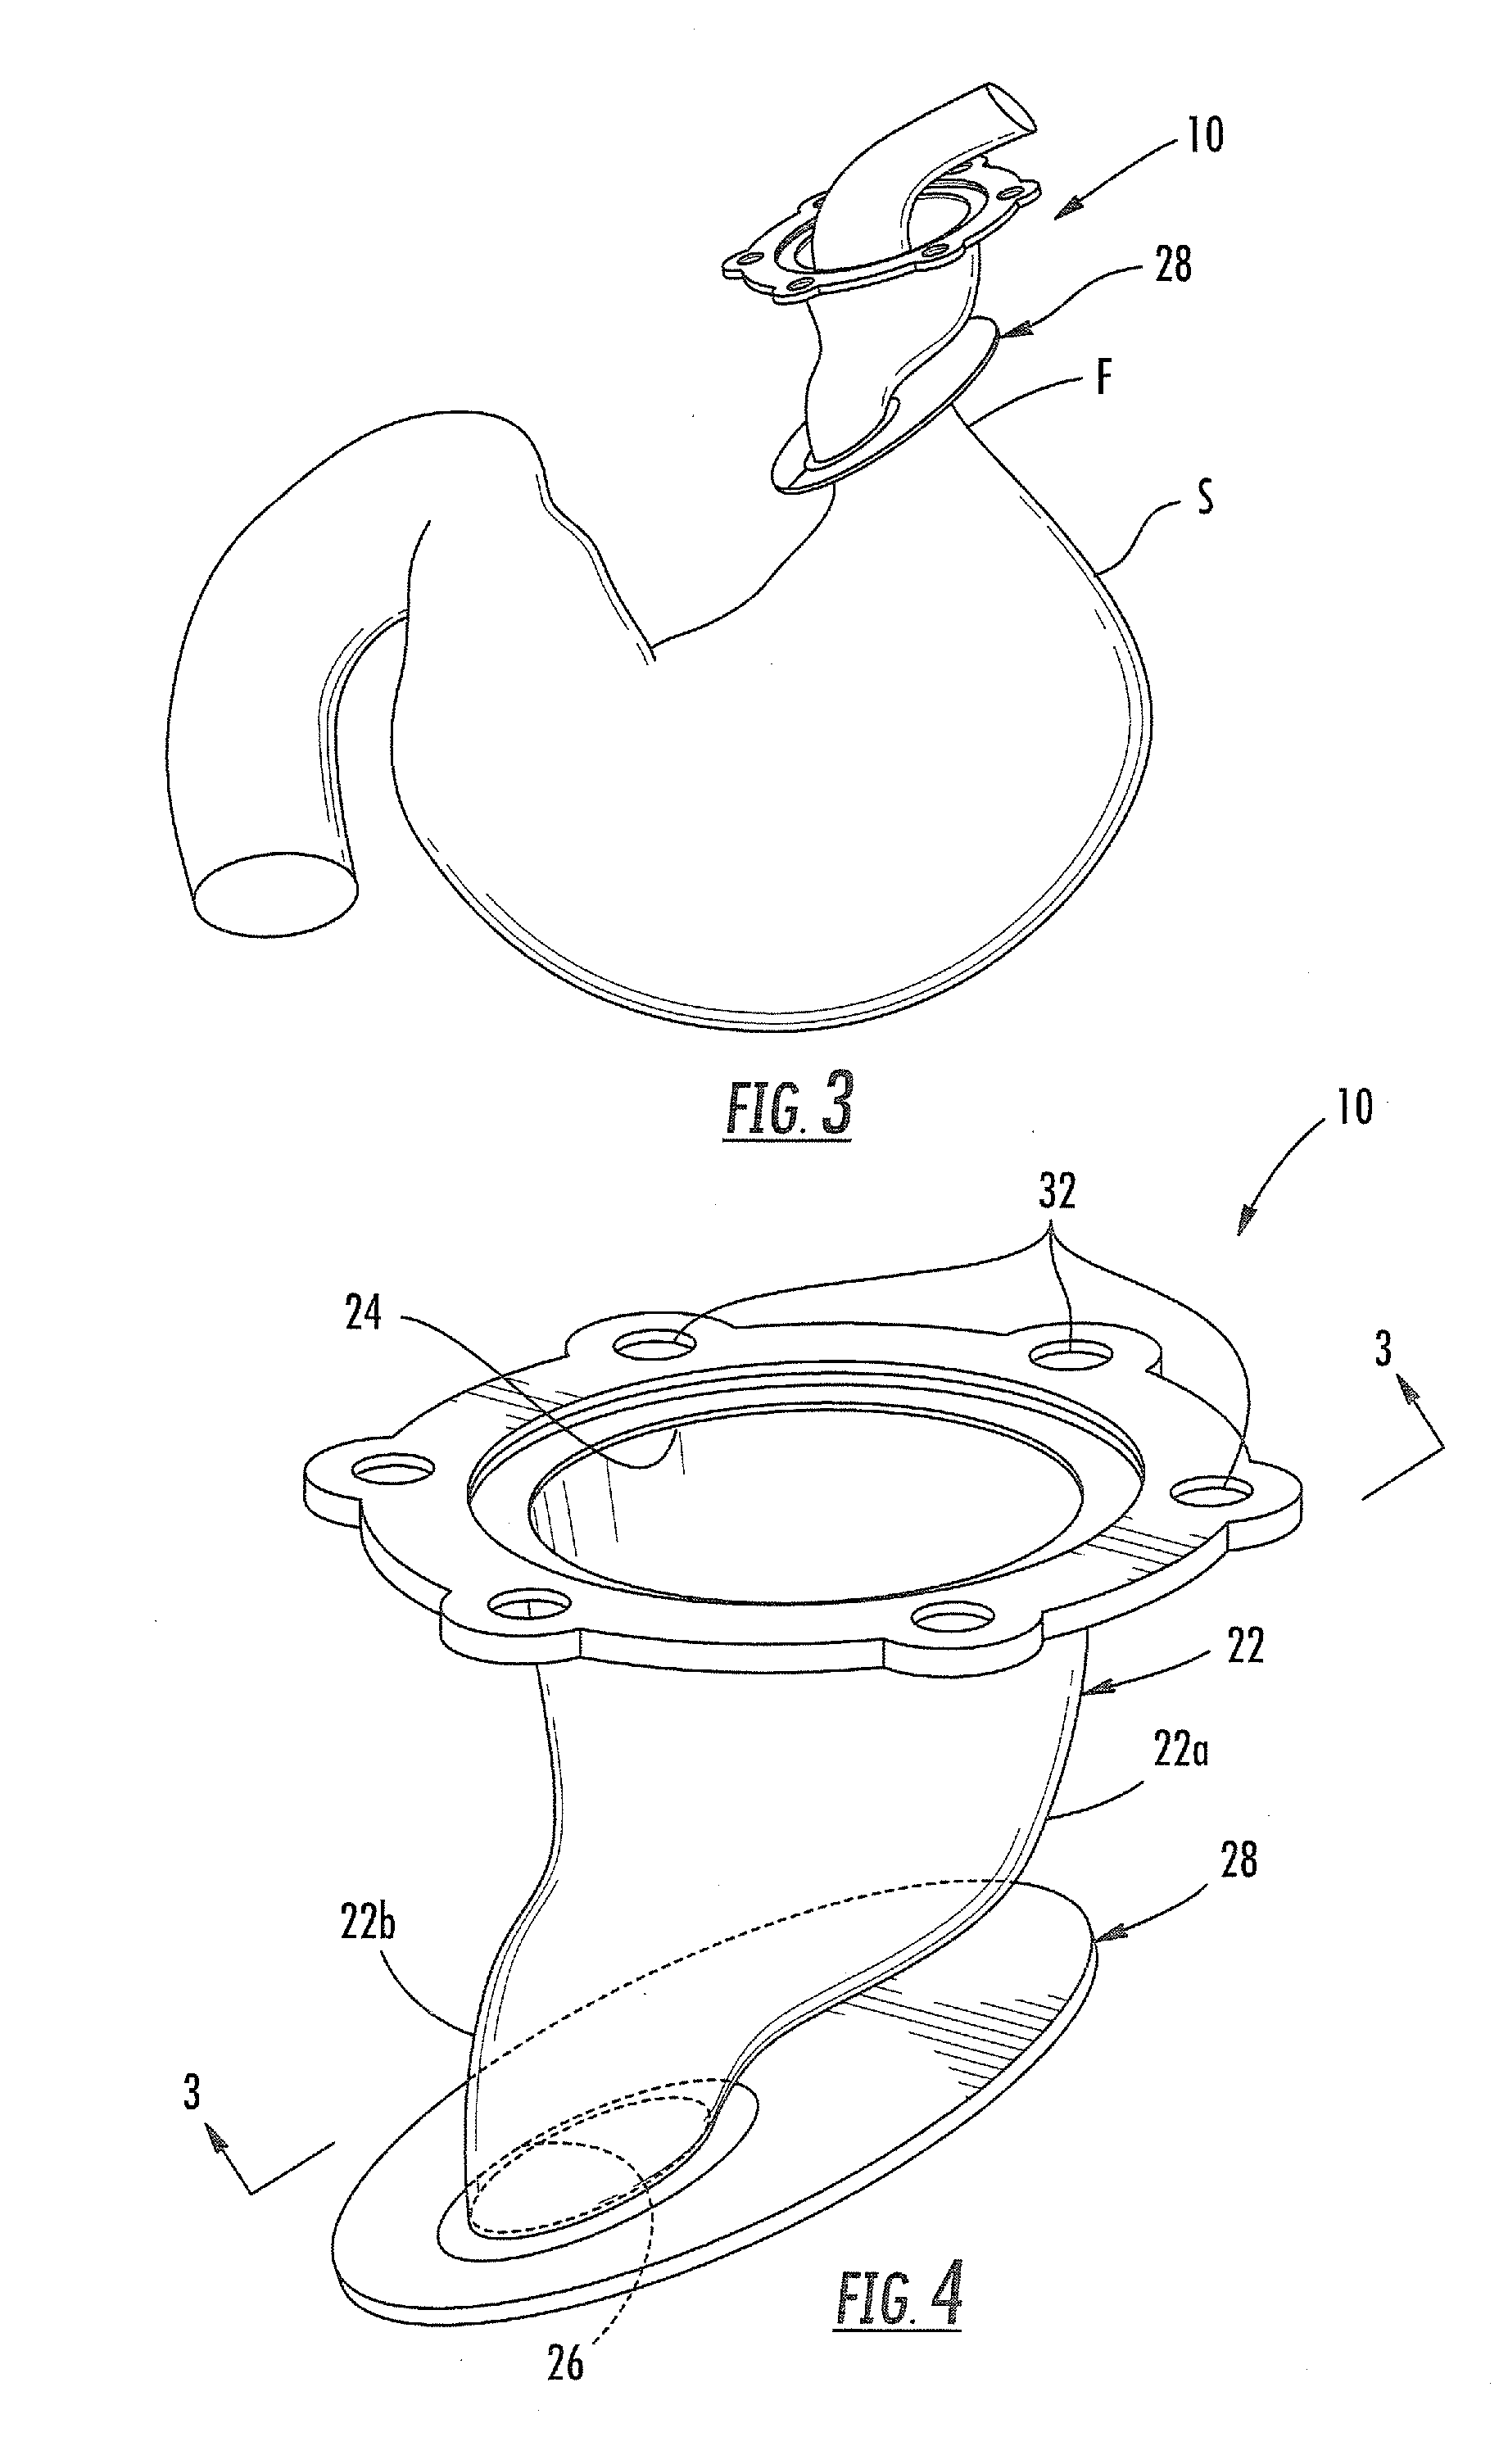 Devices for treating gastroesophageal reflux disease and hiatal hernia, and methods of treating gastroesophageal reflux disease and hiatal hernia using same